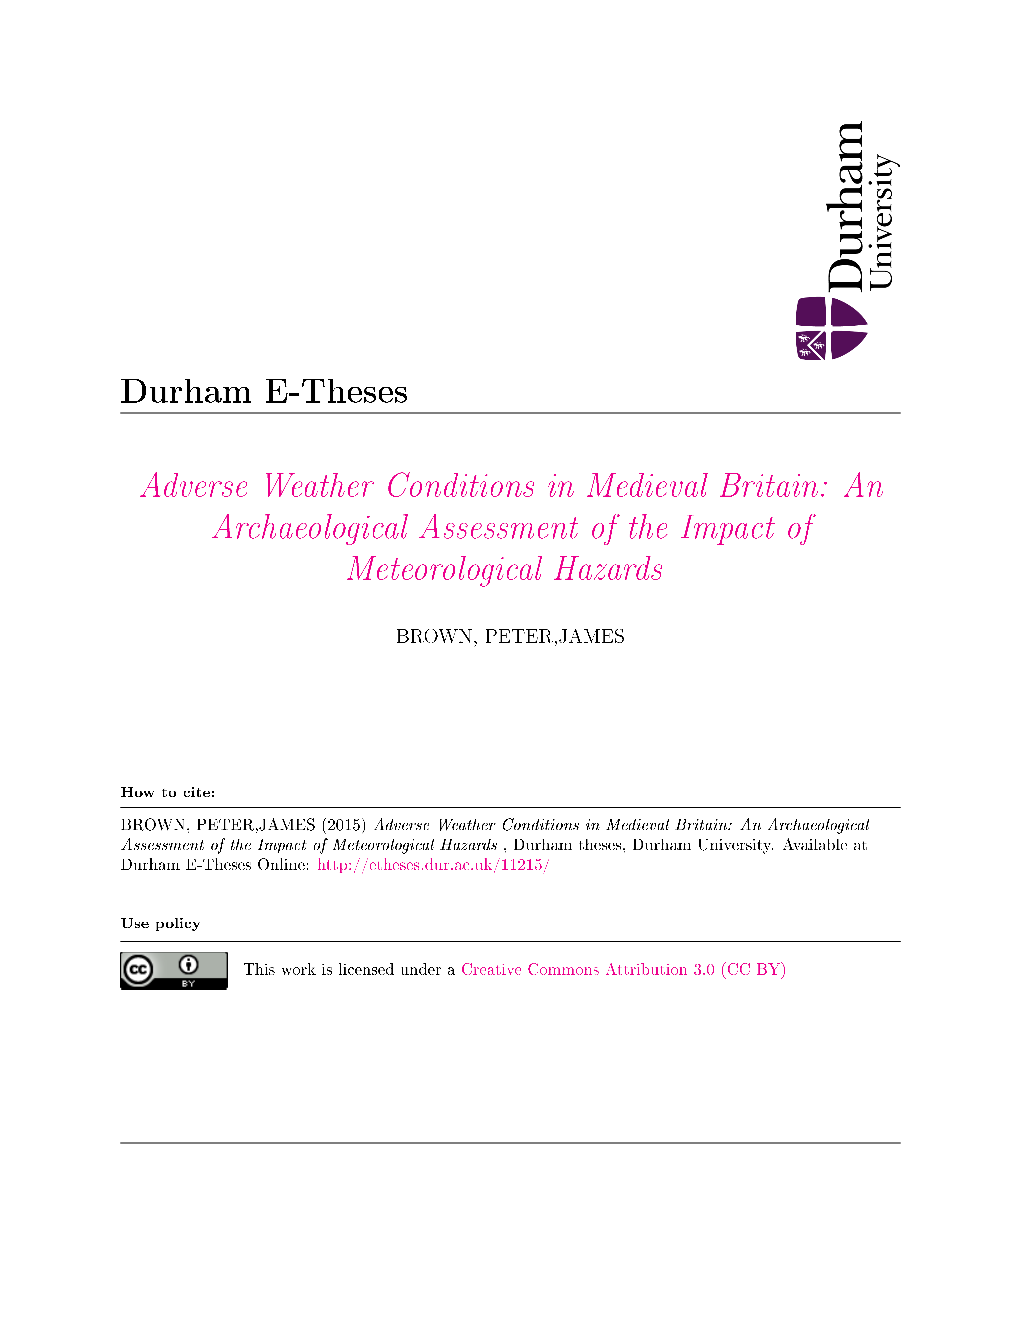 Adverse Weather Conditions in Medieval Britain: an Archaeological Assessment of the Impact of Meteorological Hazards